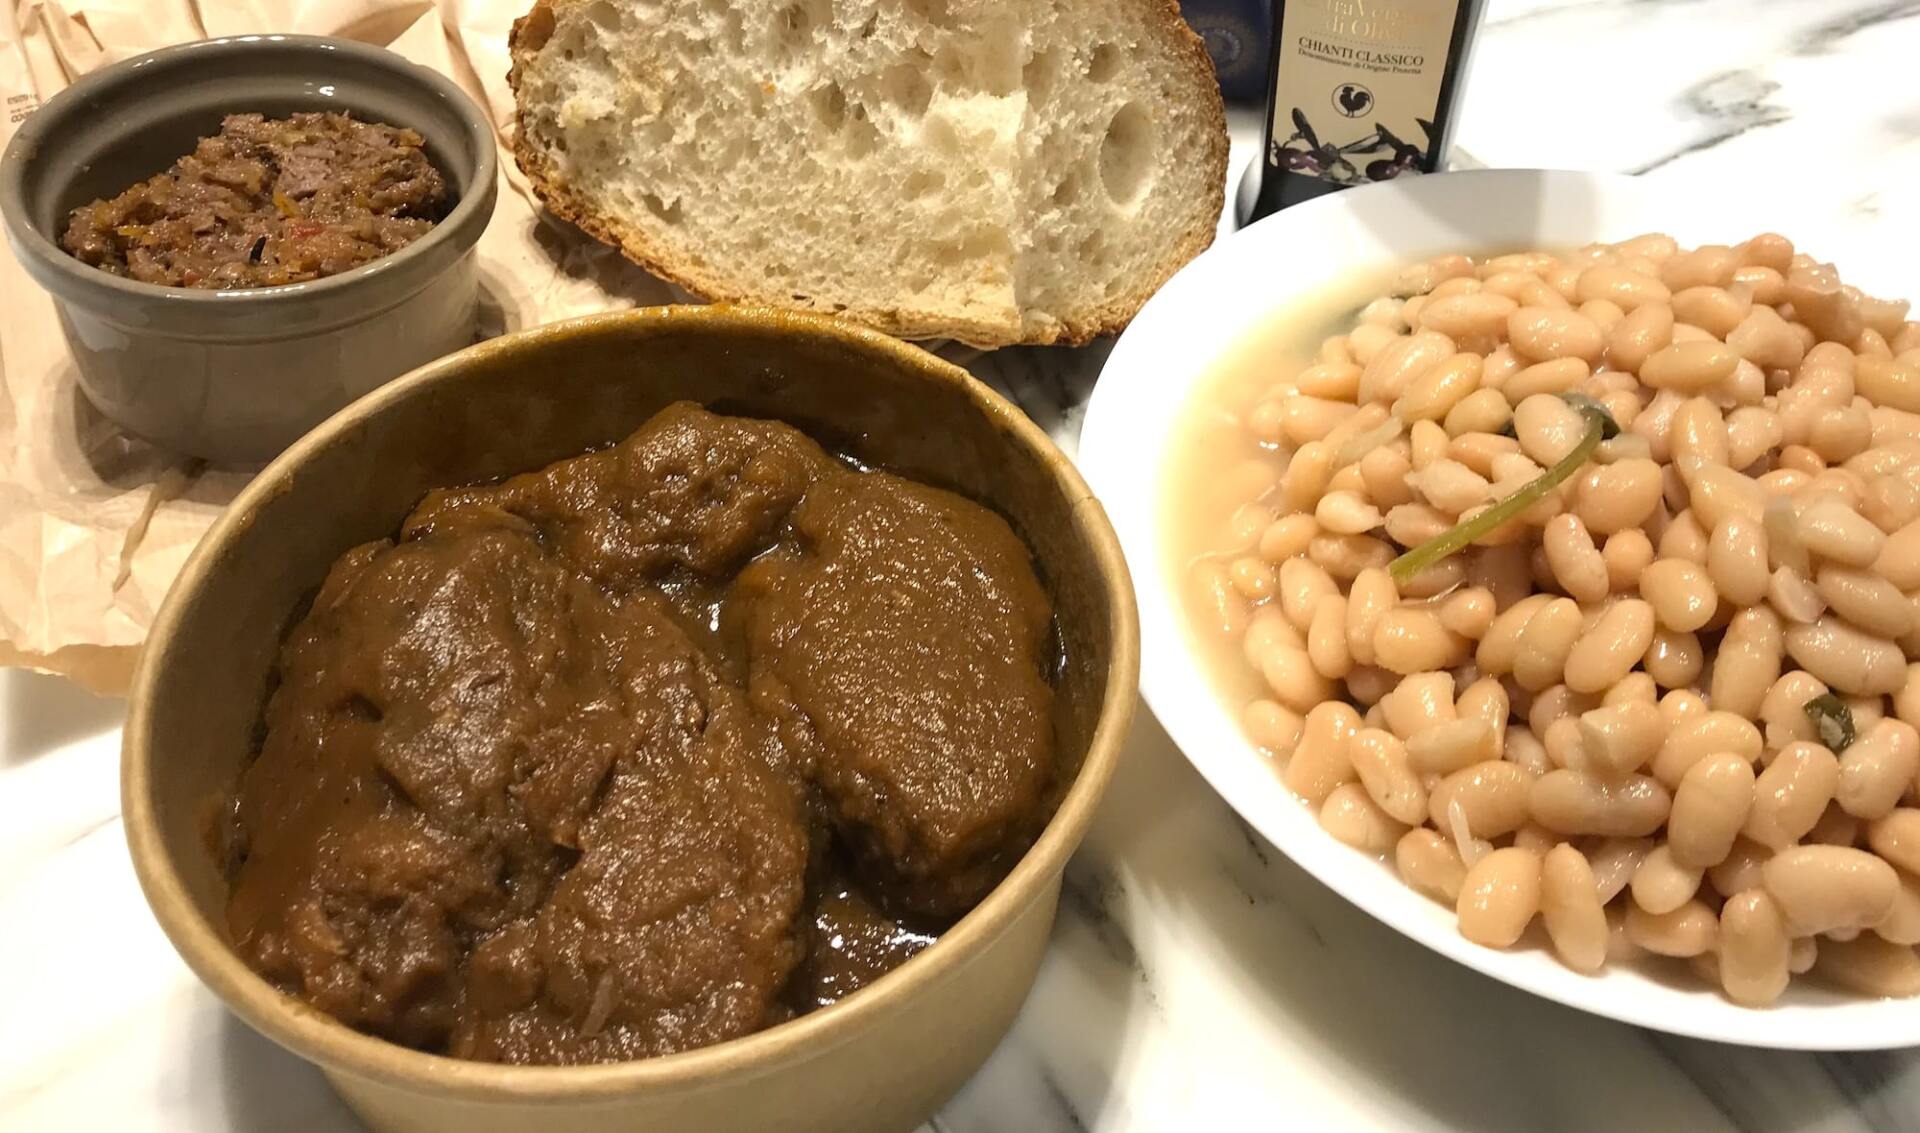 Peposo with tuscan bread and cannellini beans